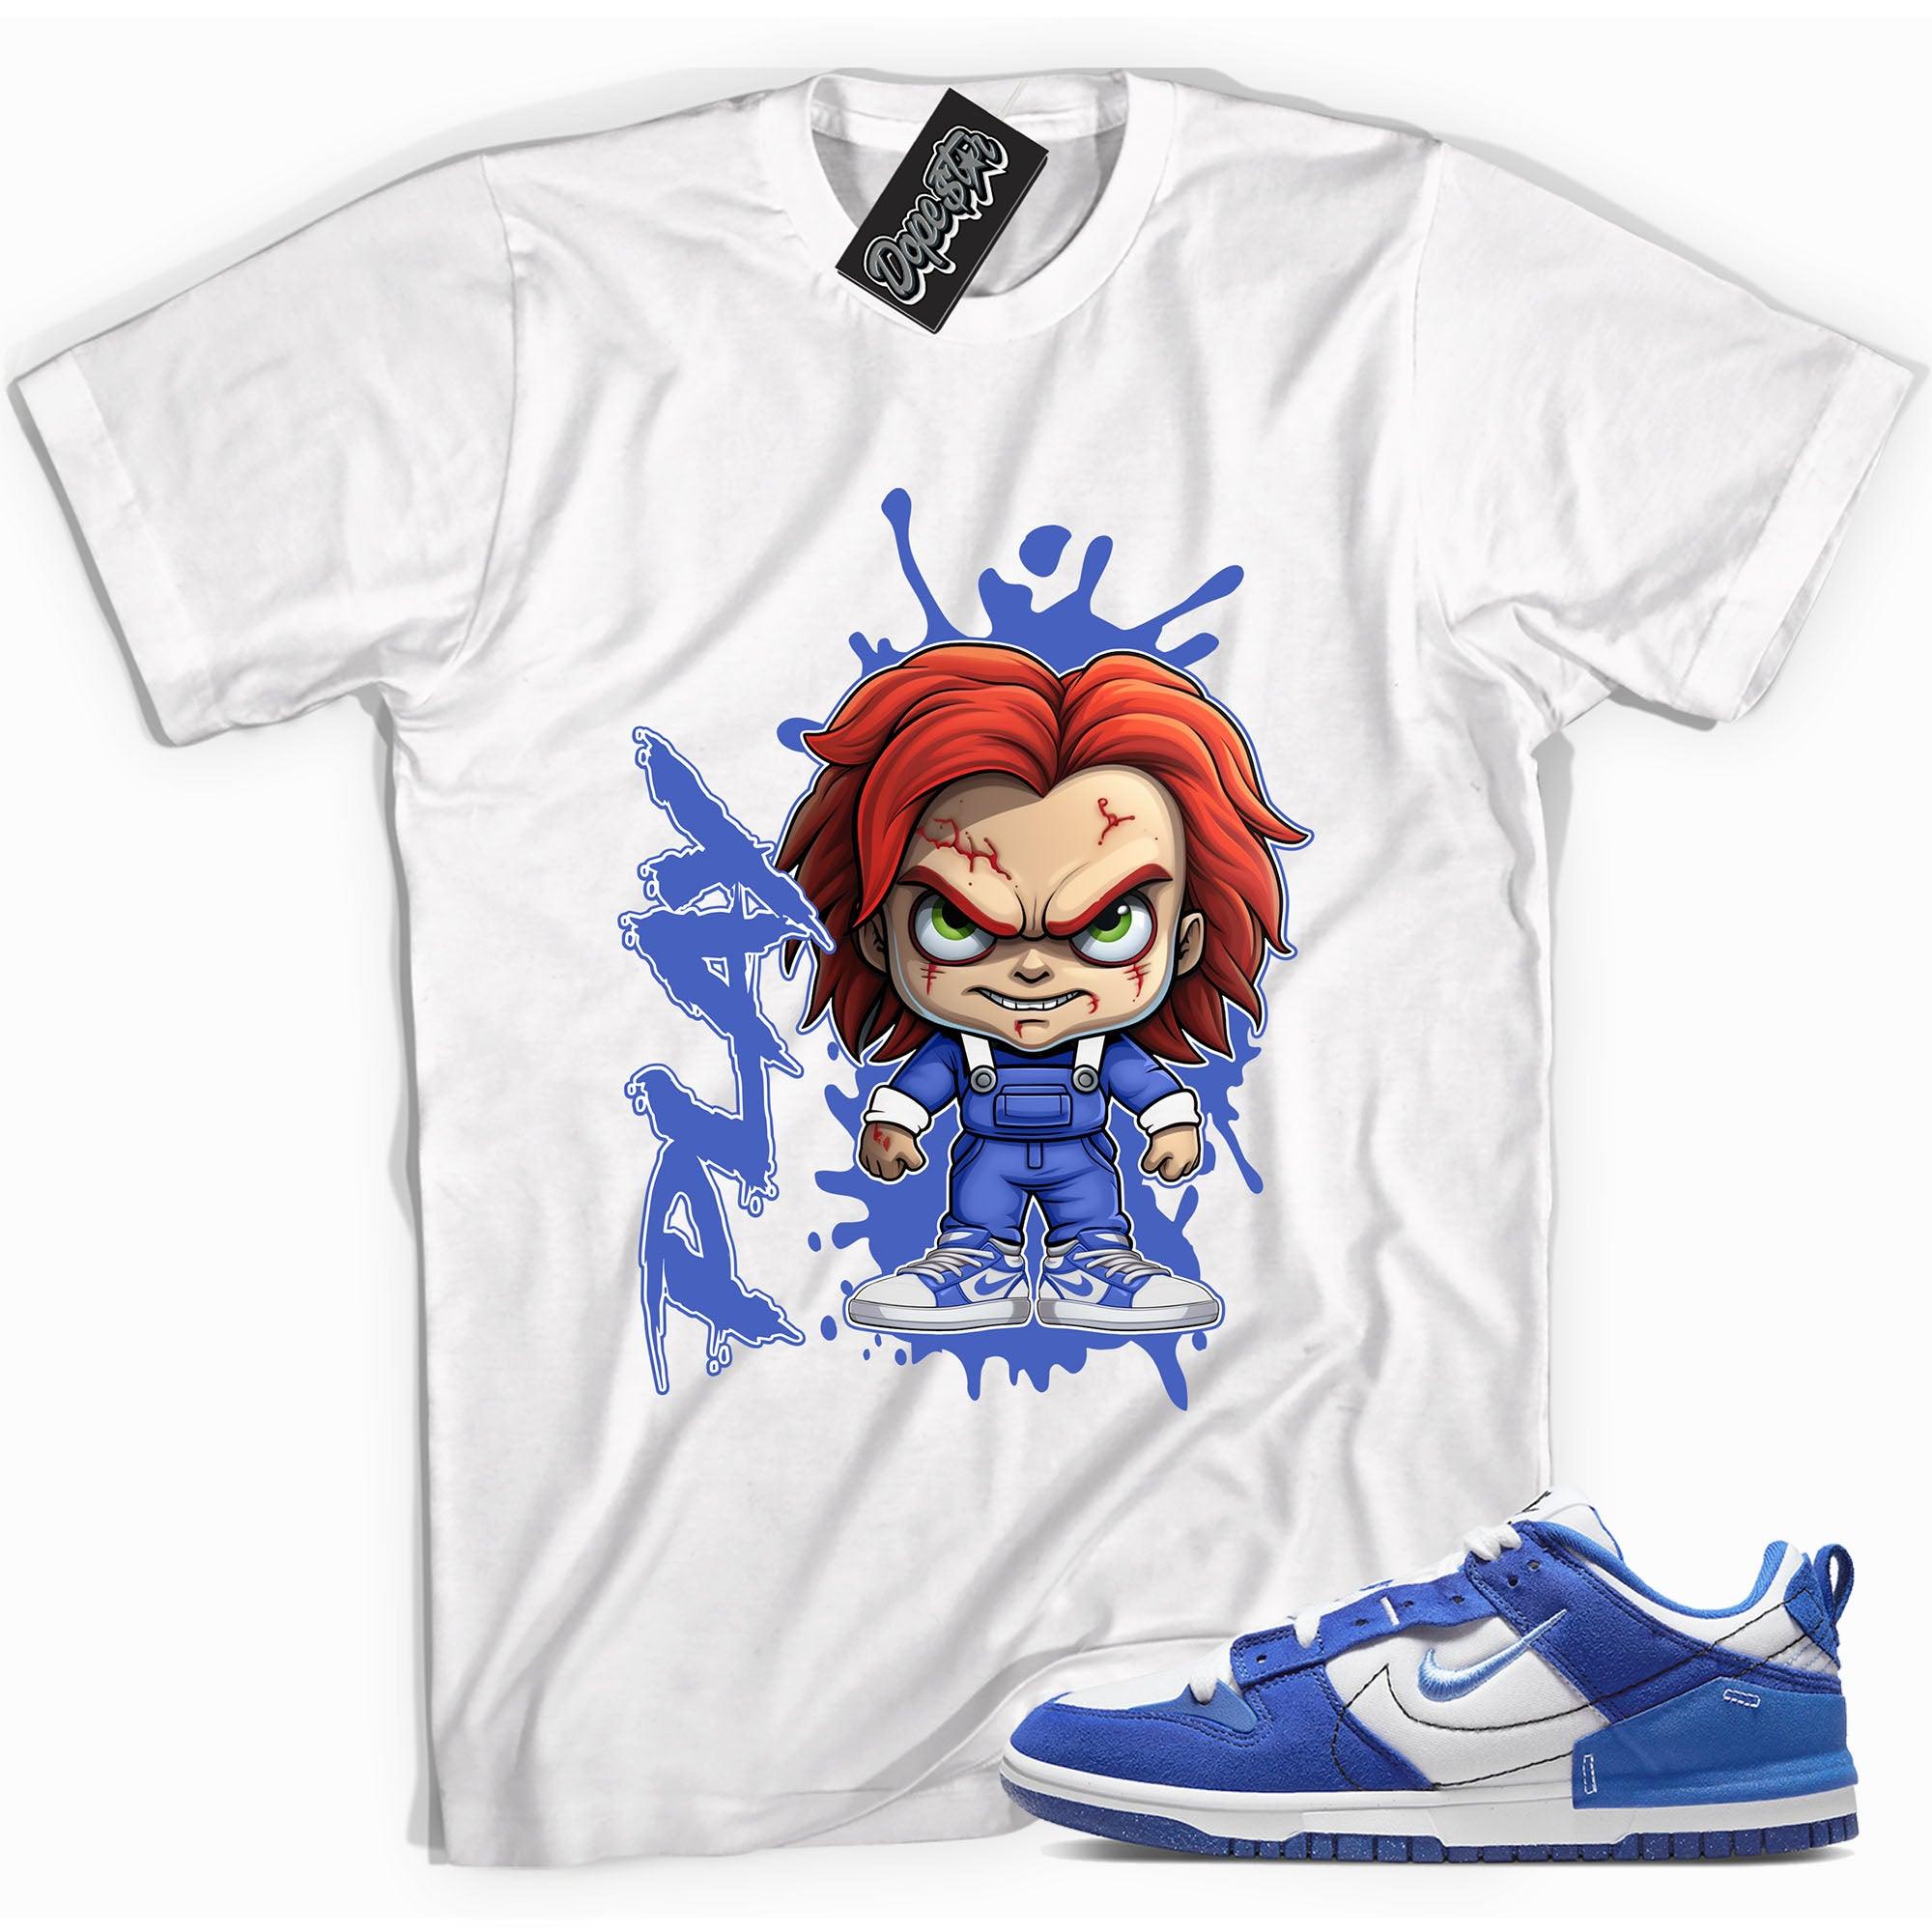 Cool White graphic tee with “ CHUCKY PLAY ” print, that perfectly matches Nike Dunk Disrupt 2 Hyper Royal sneakers 